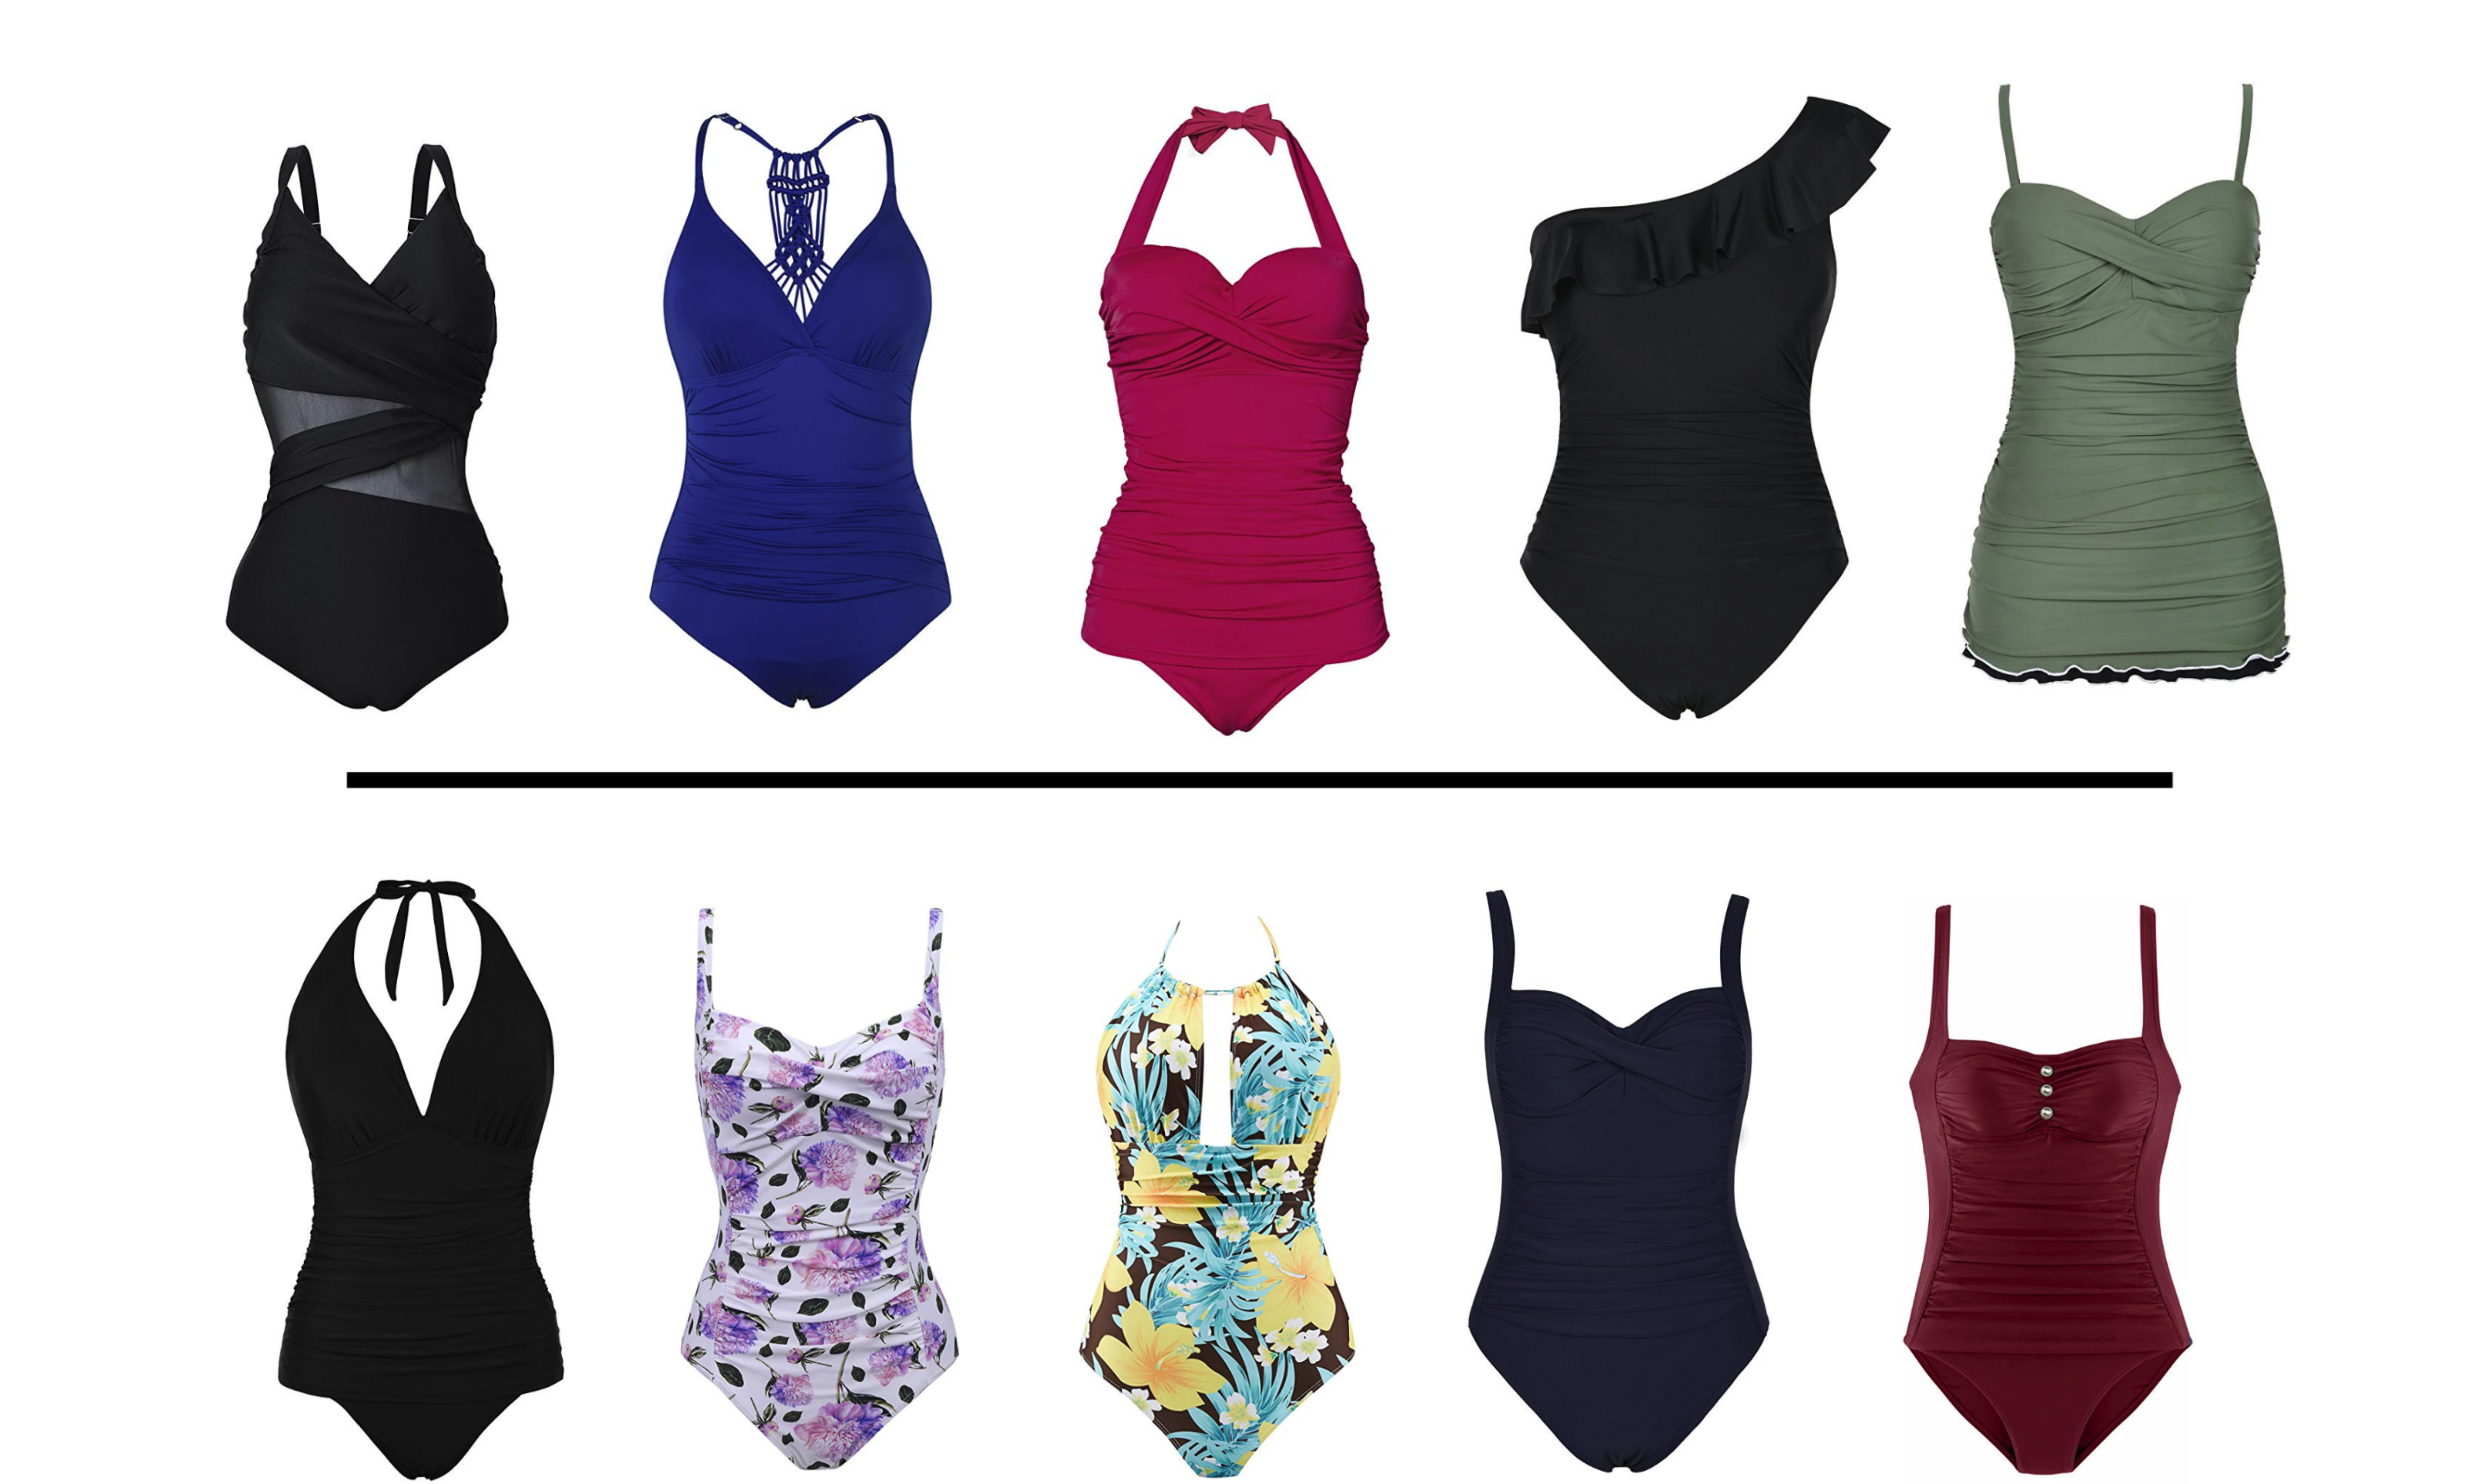 Many great slimming one piece suits.